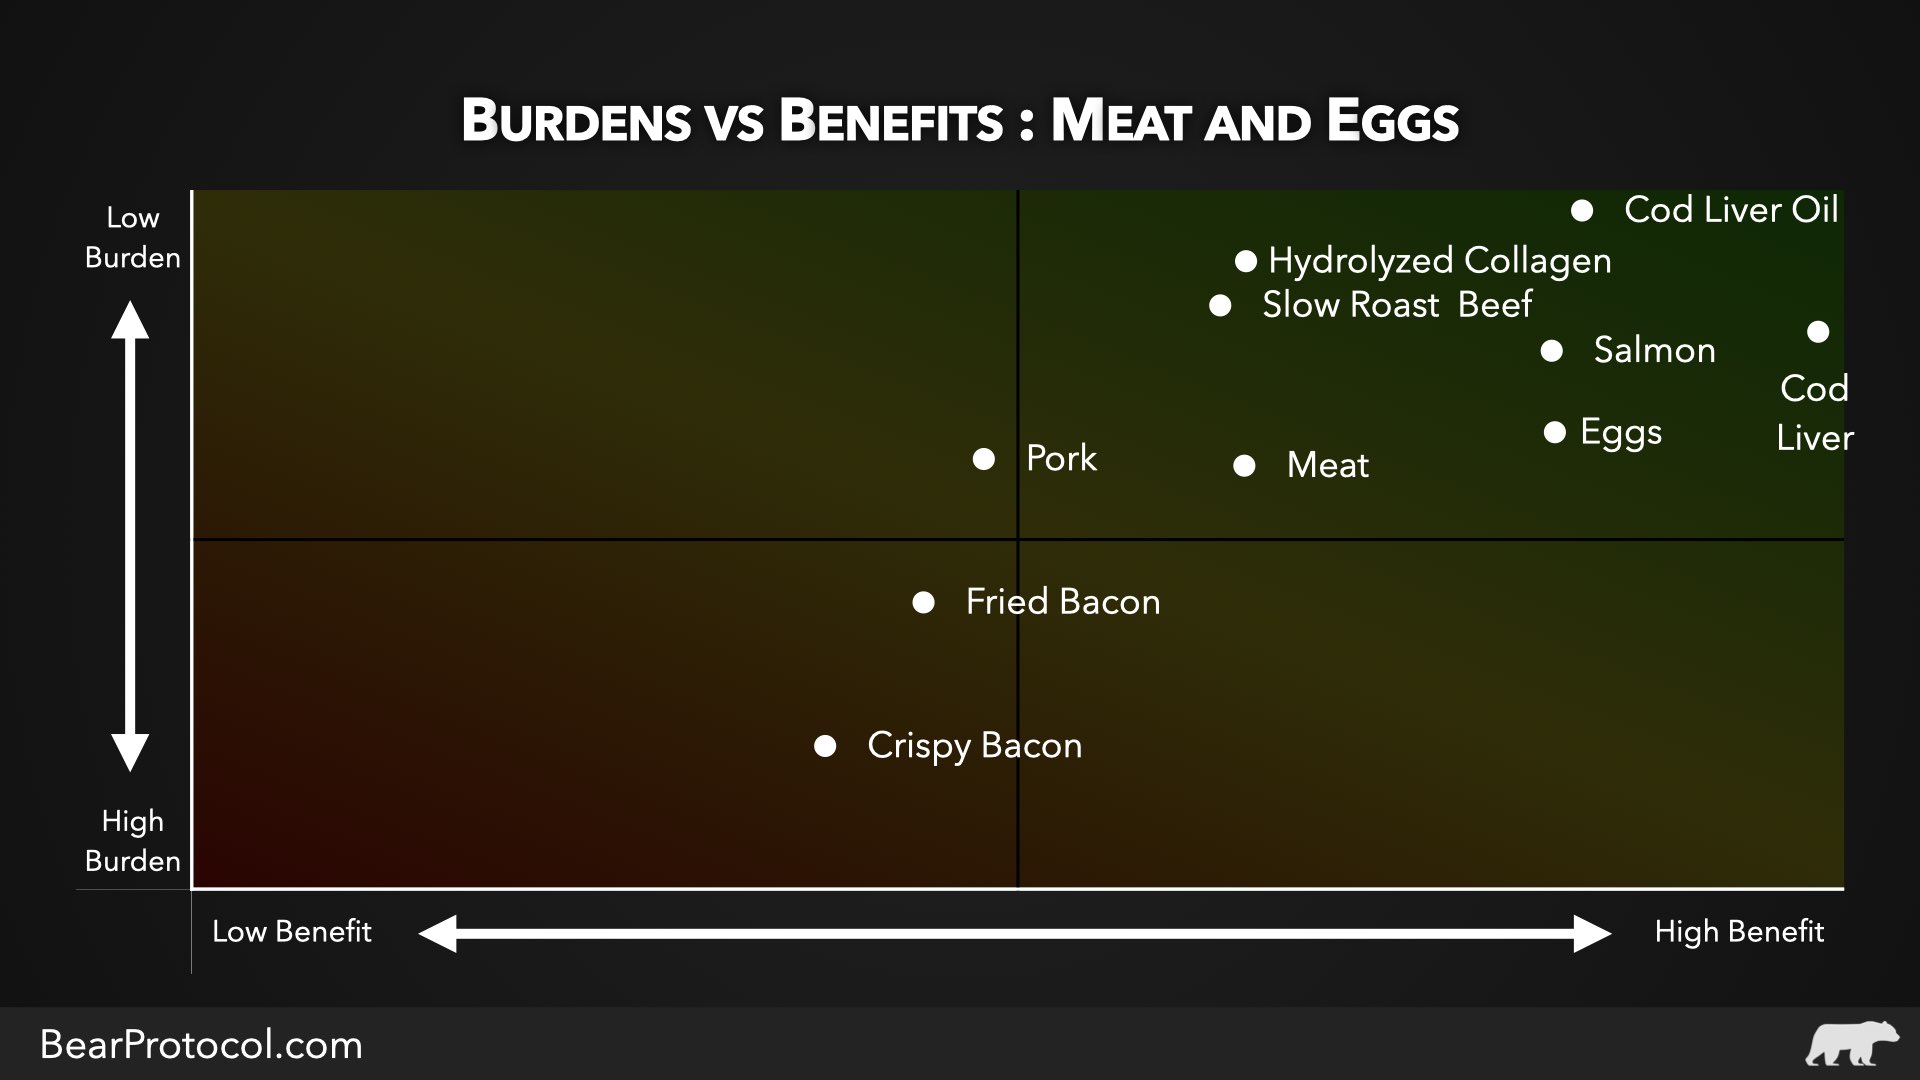 Healthy ways to eat meats and eggs